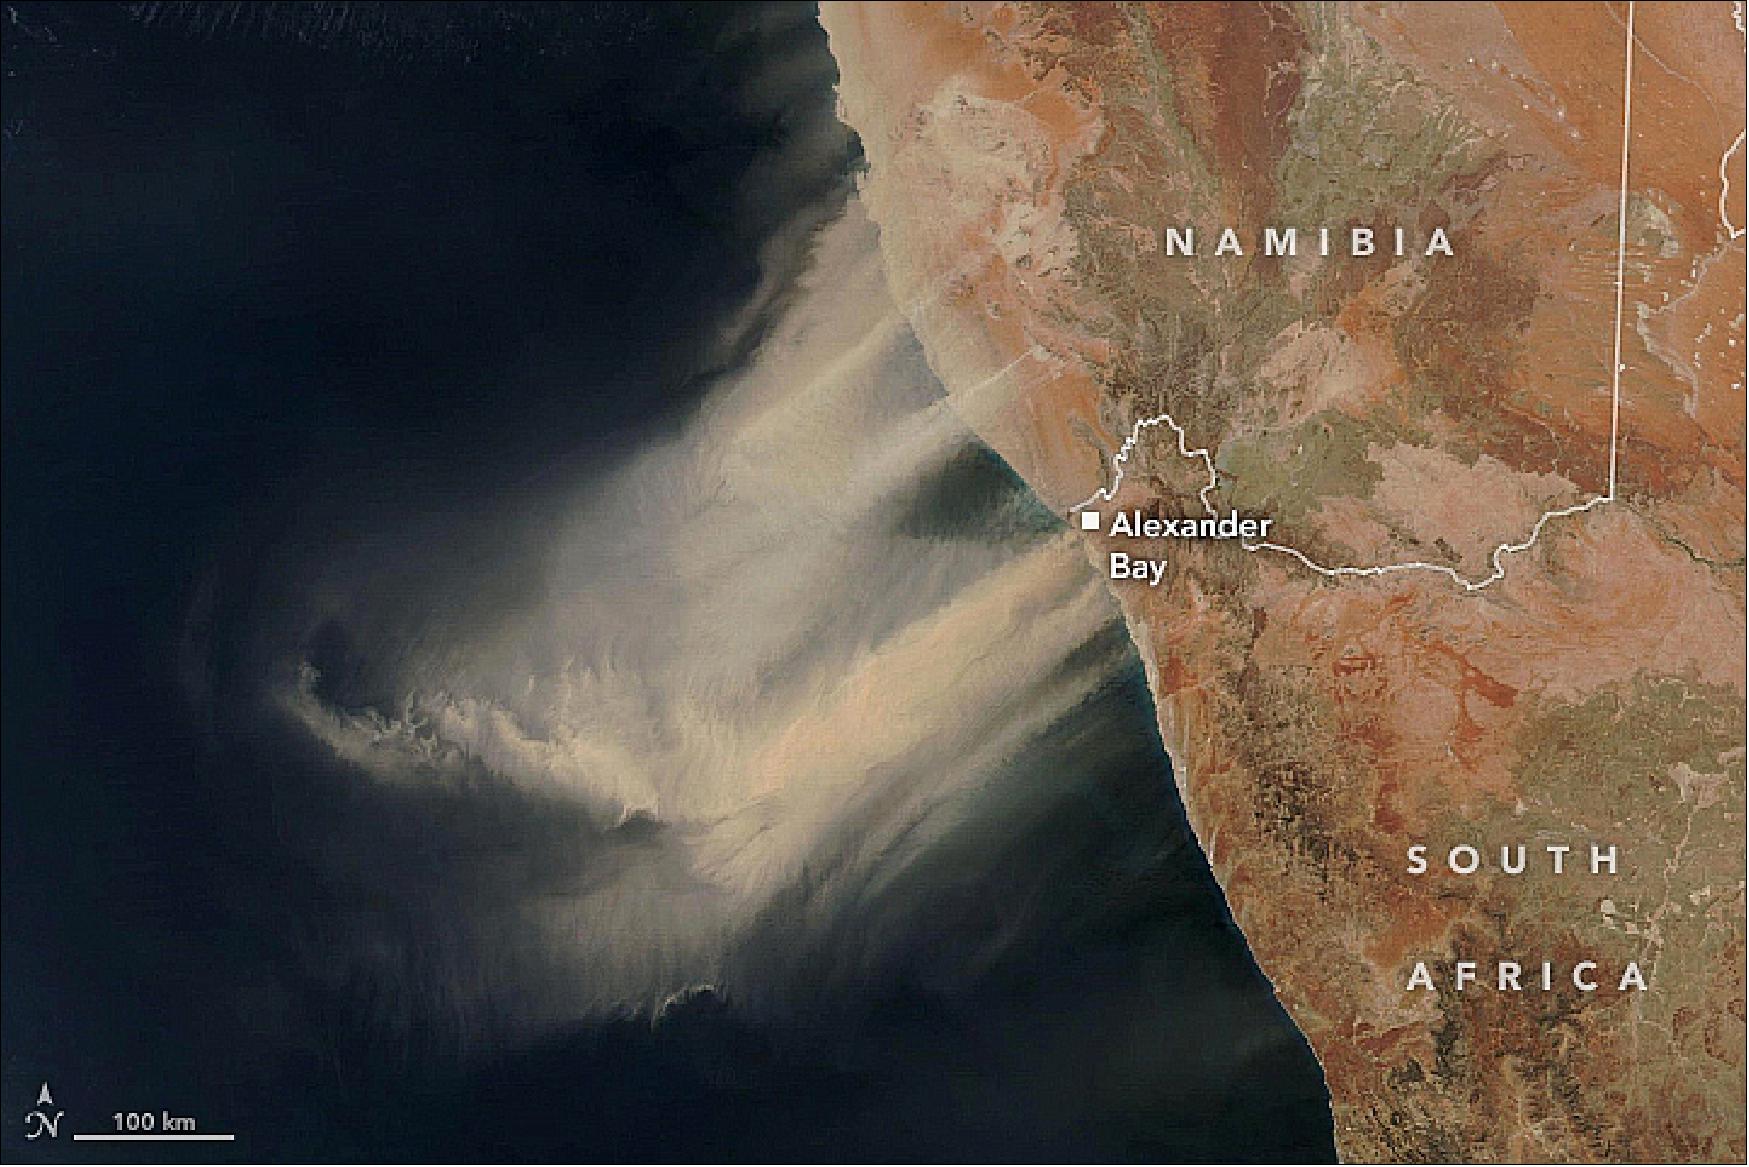 Figure 35: The plumes were observed on 25 September 2019 at 2:25 p.m. South Africa Standard Time (12:25 Universal Time) with VIIRS on the NOAA/NASA Suomi- NPP satellite. The event covered a wide area north and south of the Orange River, which forms part of the border between Namibia and South Africa (image credit: NASA Earth Observatory image by Lauren Dauphin, using VIIRS data from NASA EOSDIS/LANCE and GIBS/Worldview, and Suomi-NPP. Story by Kathryn Hansen)